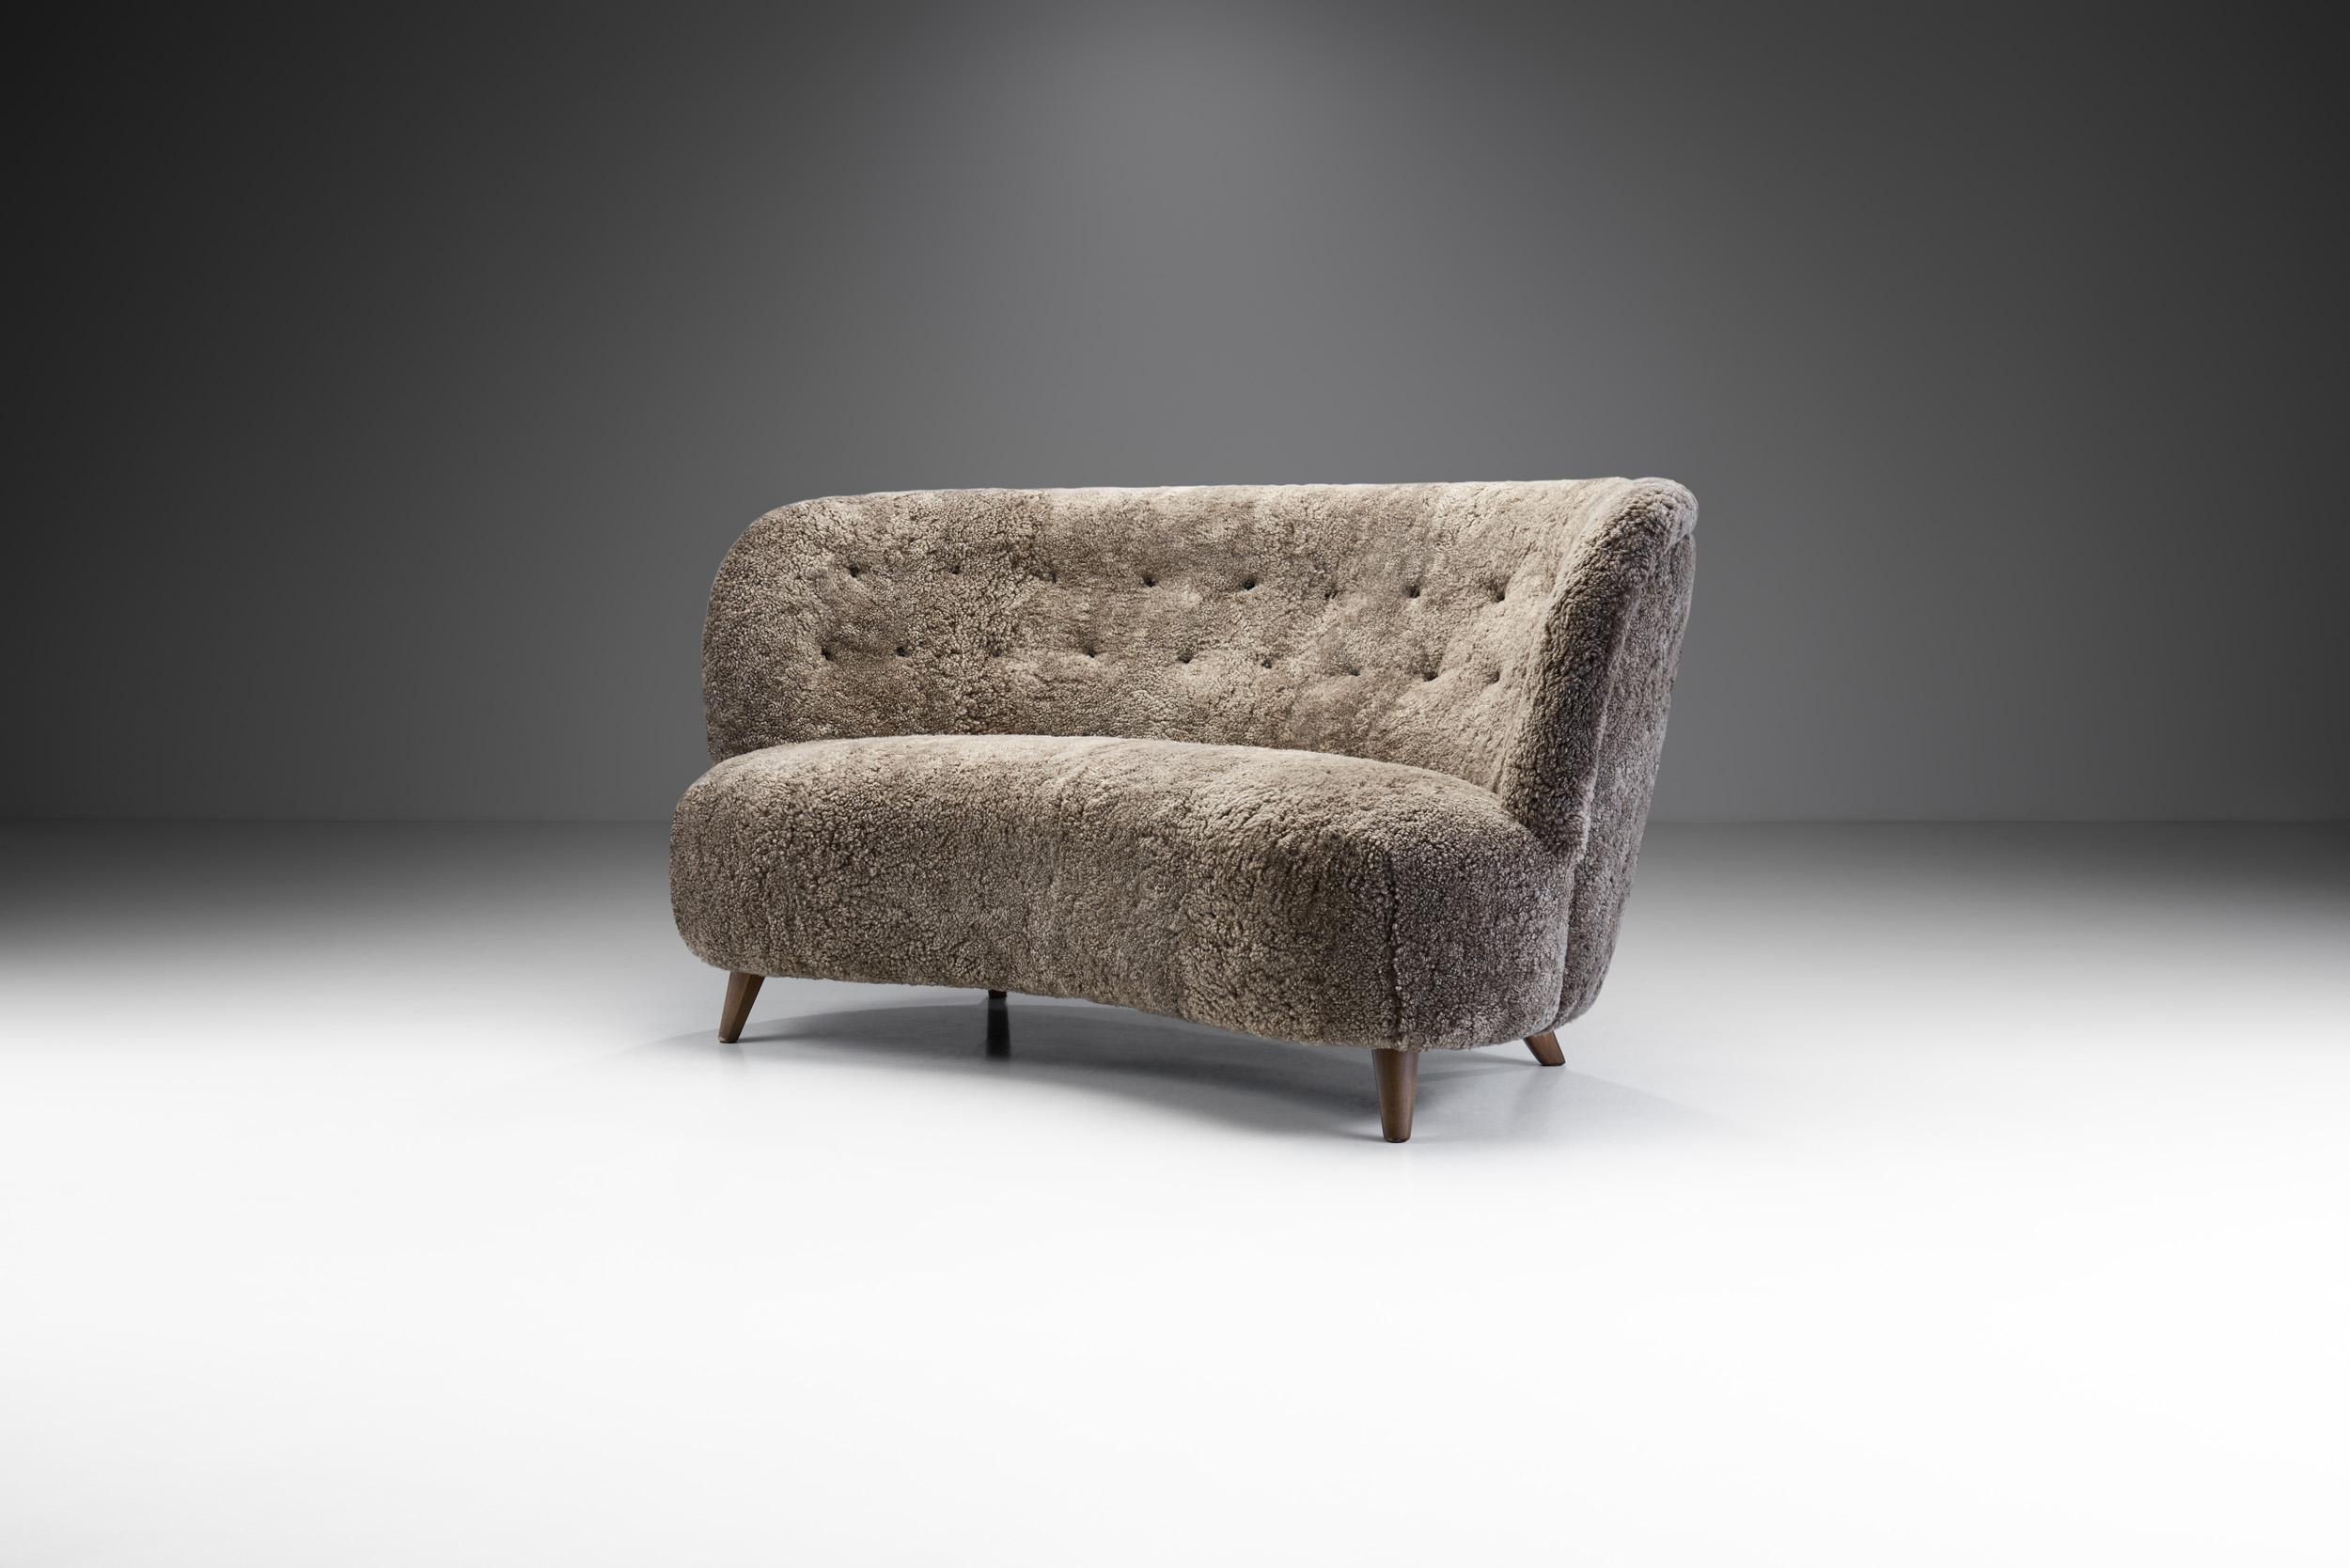 Mid-Century Modernism is a recognized term around the world, standing for the characteristic style of the furniture designs created during the mid-20th century. As this sofa shows, furniture created in this period is characterized by functionality,